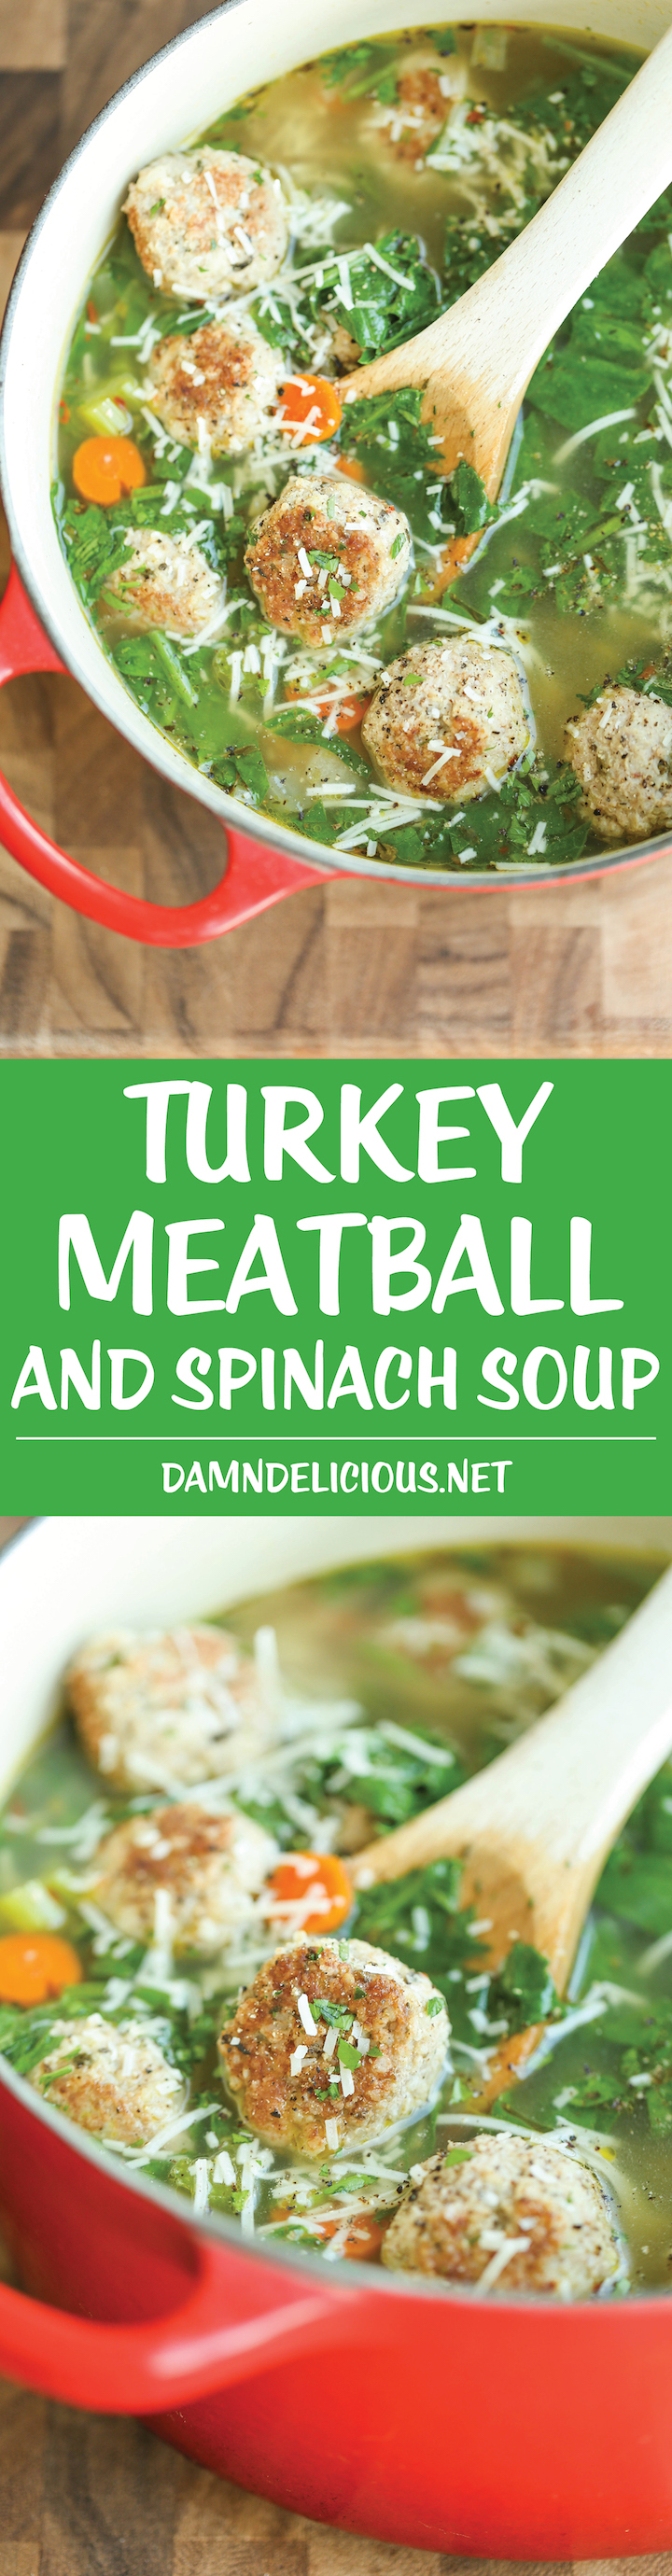 Turkey Meatball and Spinach Soup - A quick and easy hearty soup for any night of the week. And you can even cook/prep/freeze the meatballs beforehand!